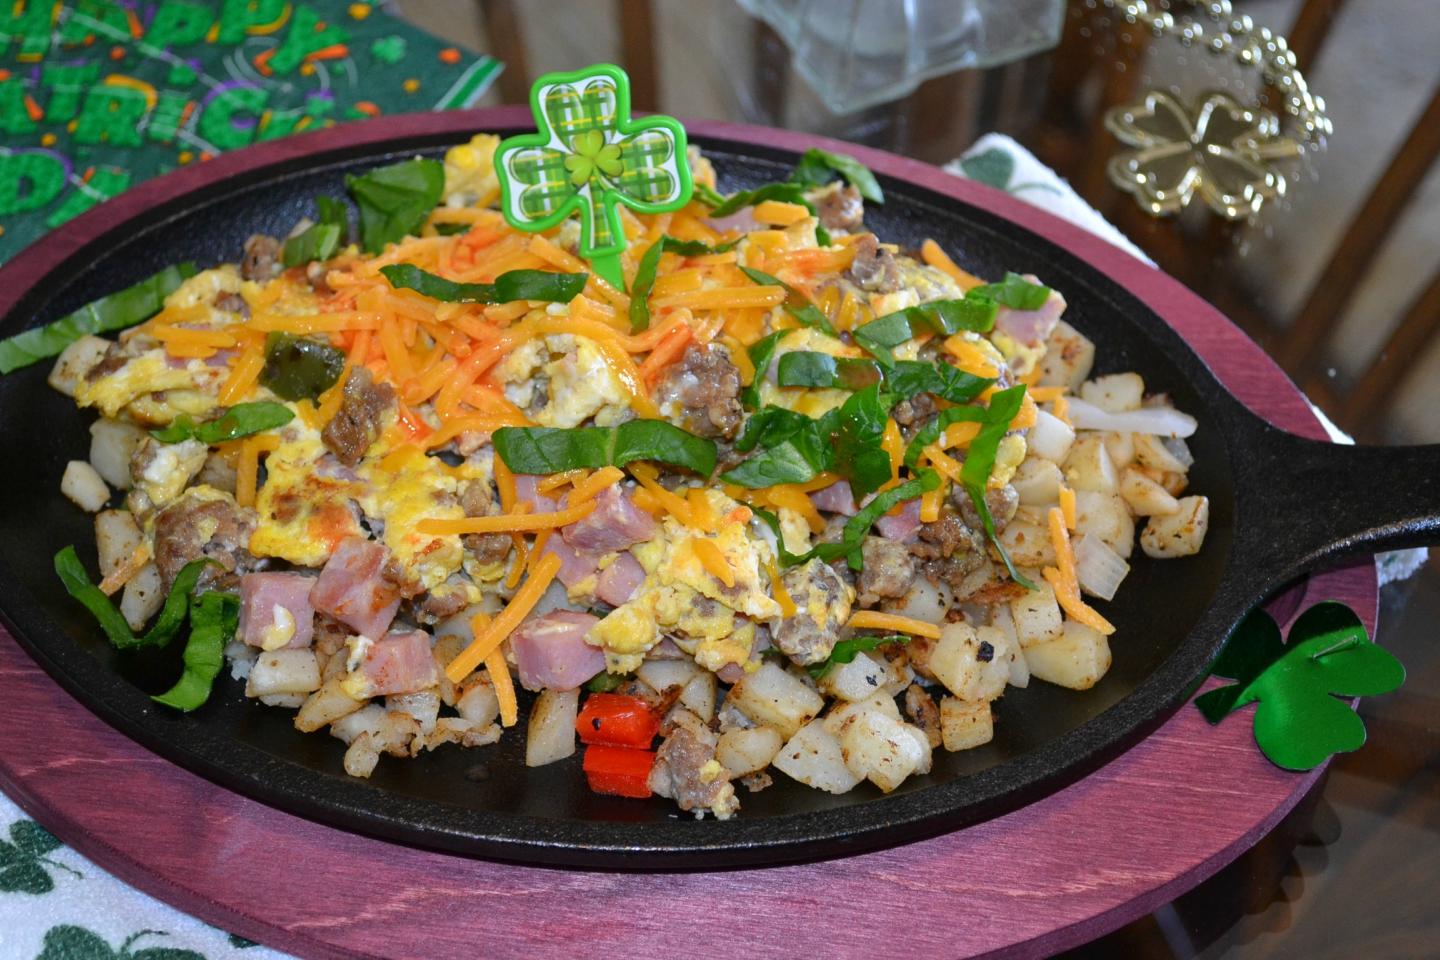 St. Patrick's Day breakfast skillets packed with eggs, meats, veggies, and cheese.